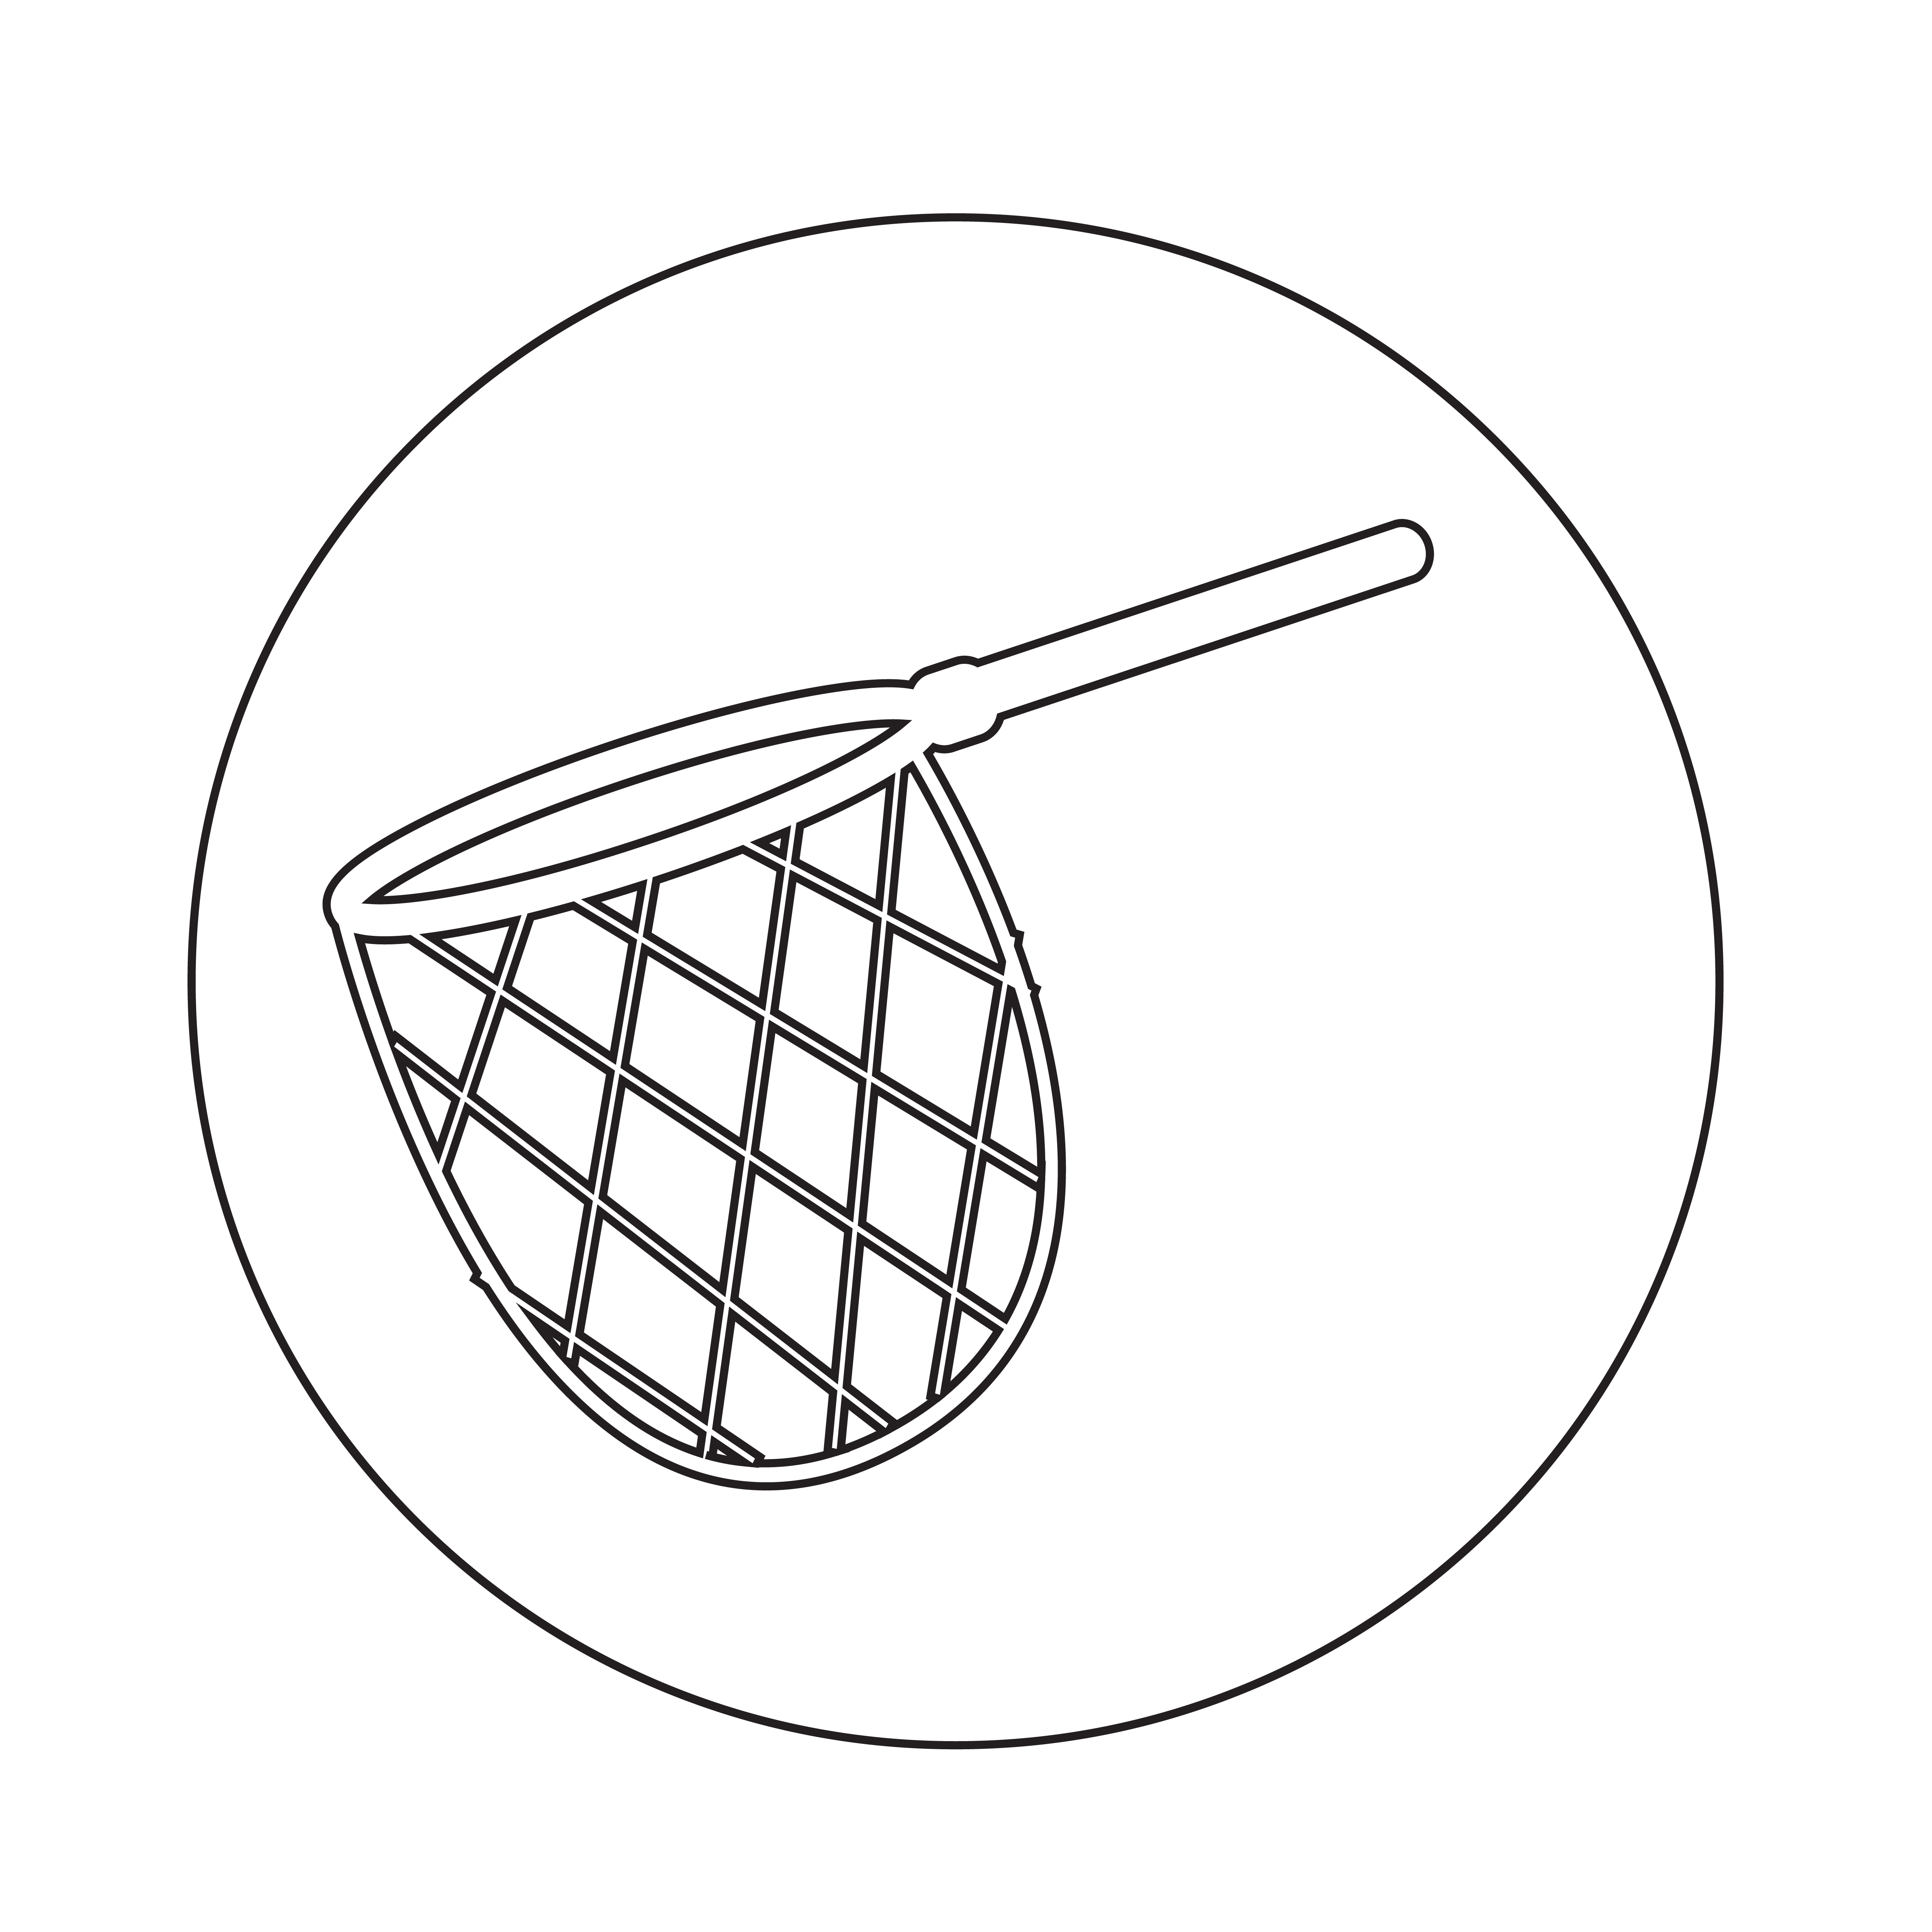 Download fishing hunting net icon - Download Free Vectors, Clipart ...